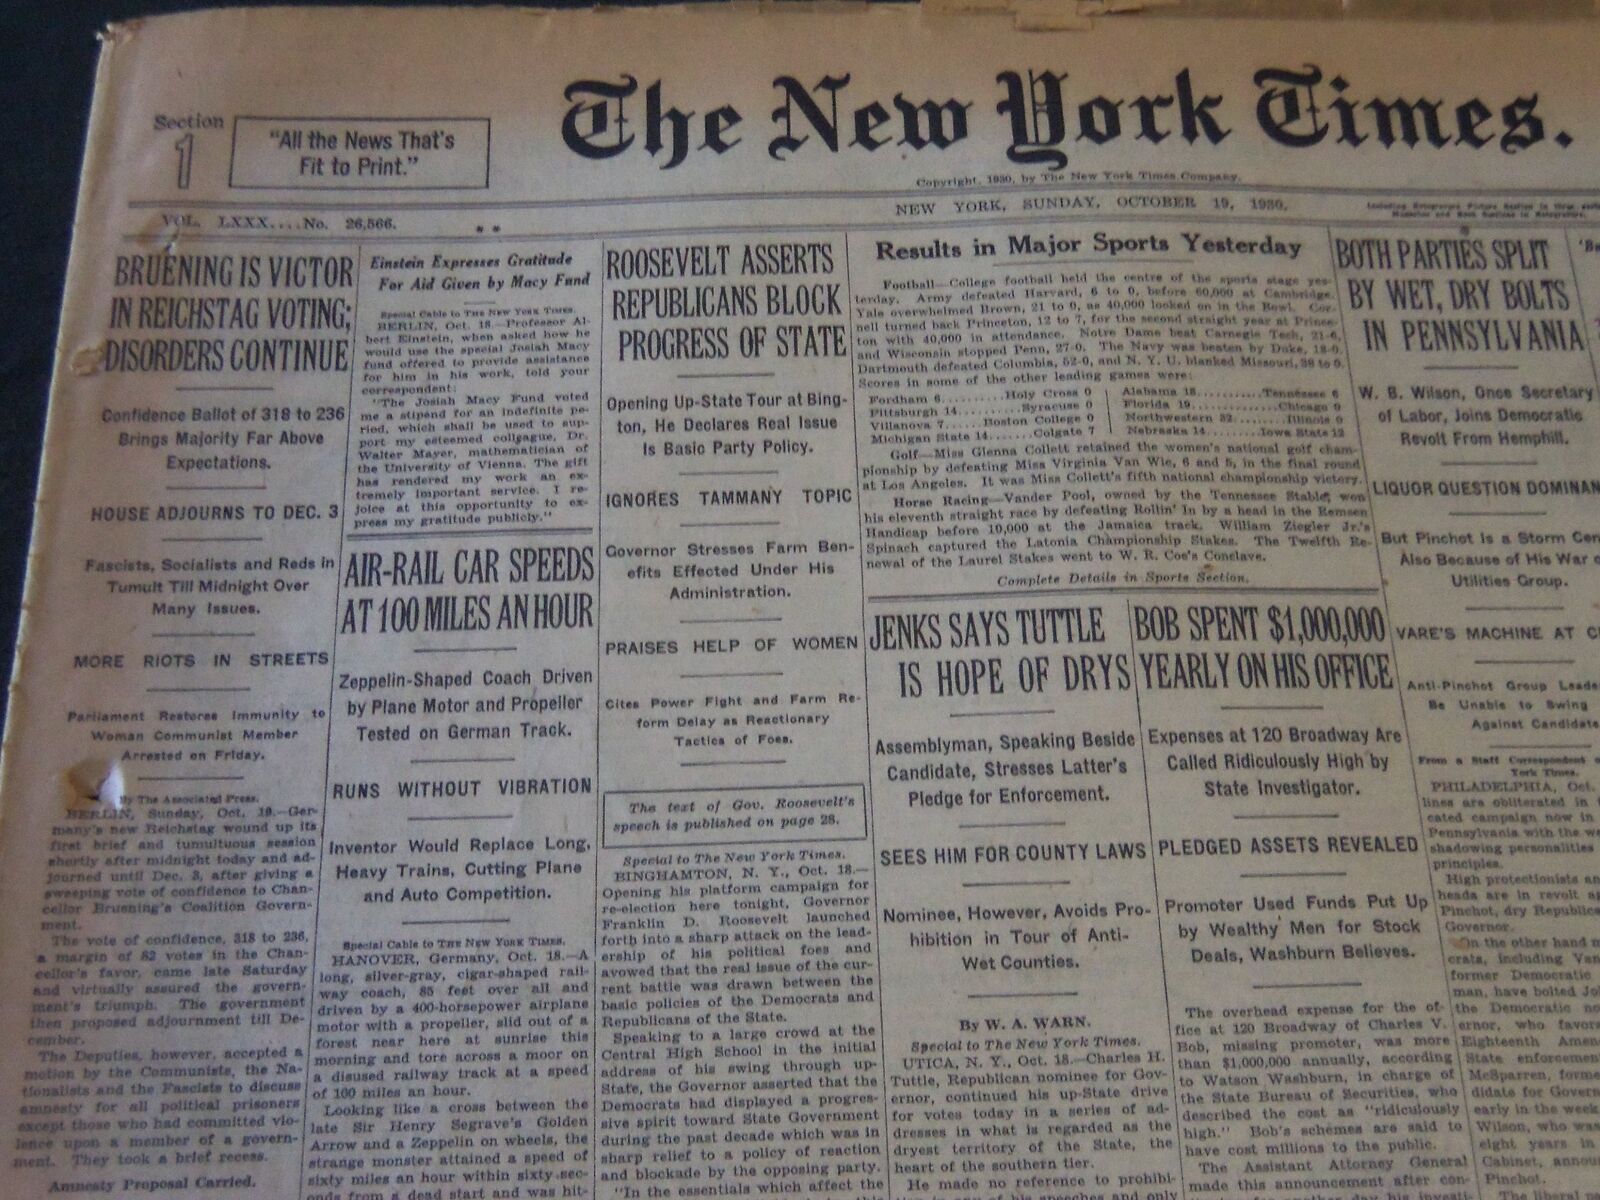 1930 OCTOBER 19 NEW YORK TIMES - BRUENING IS VICTOR IN REICHSTAG VOTING- NT 5746